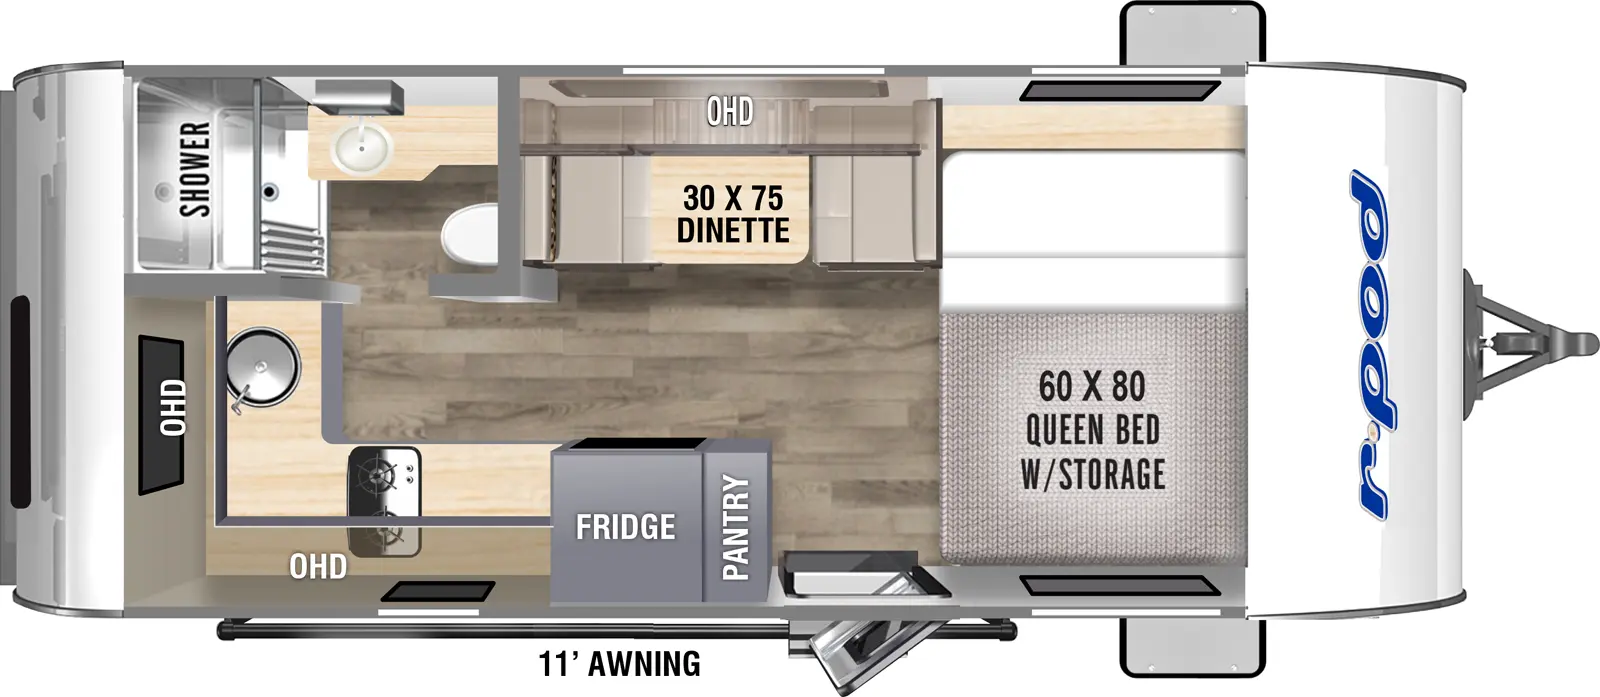 The RP-194C has zero slideouts and one entry. Exterior features an 11 foot awning. Interior layout front to back: side-facing queen bed with storage, off-door side dinette with overhead cabinet; door side entry, pantry, refrigerator, and kitchen counter with cooktop and overhead cabinet that wraps around to the rear with sink; rear off-door side full bathroom.